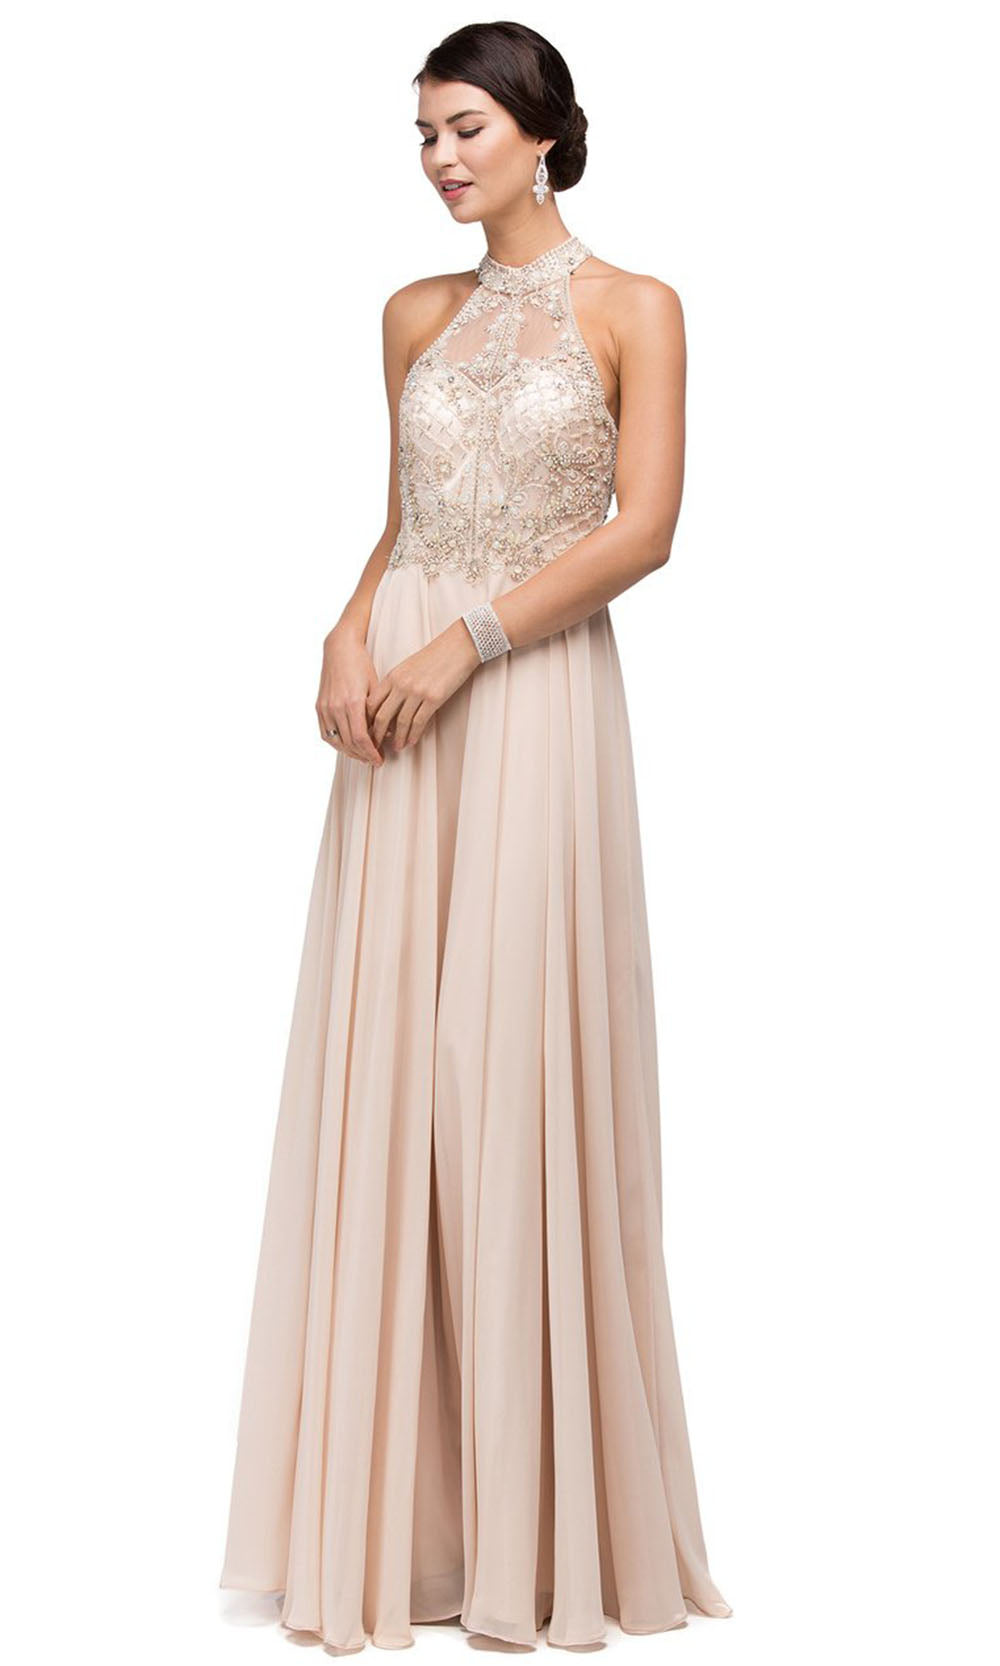 Dancing Queen - 9293 Embellished High Halter A-Line Gown In Neutral